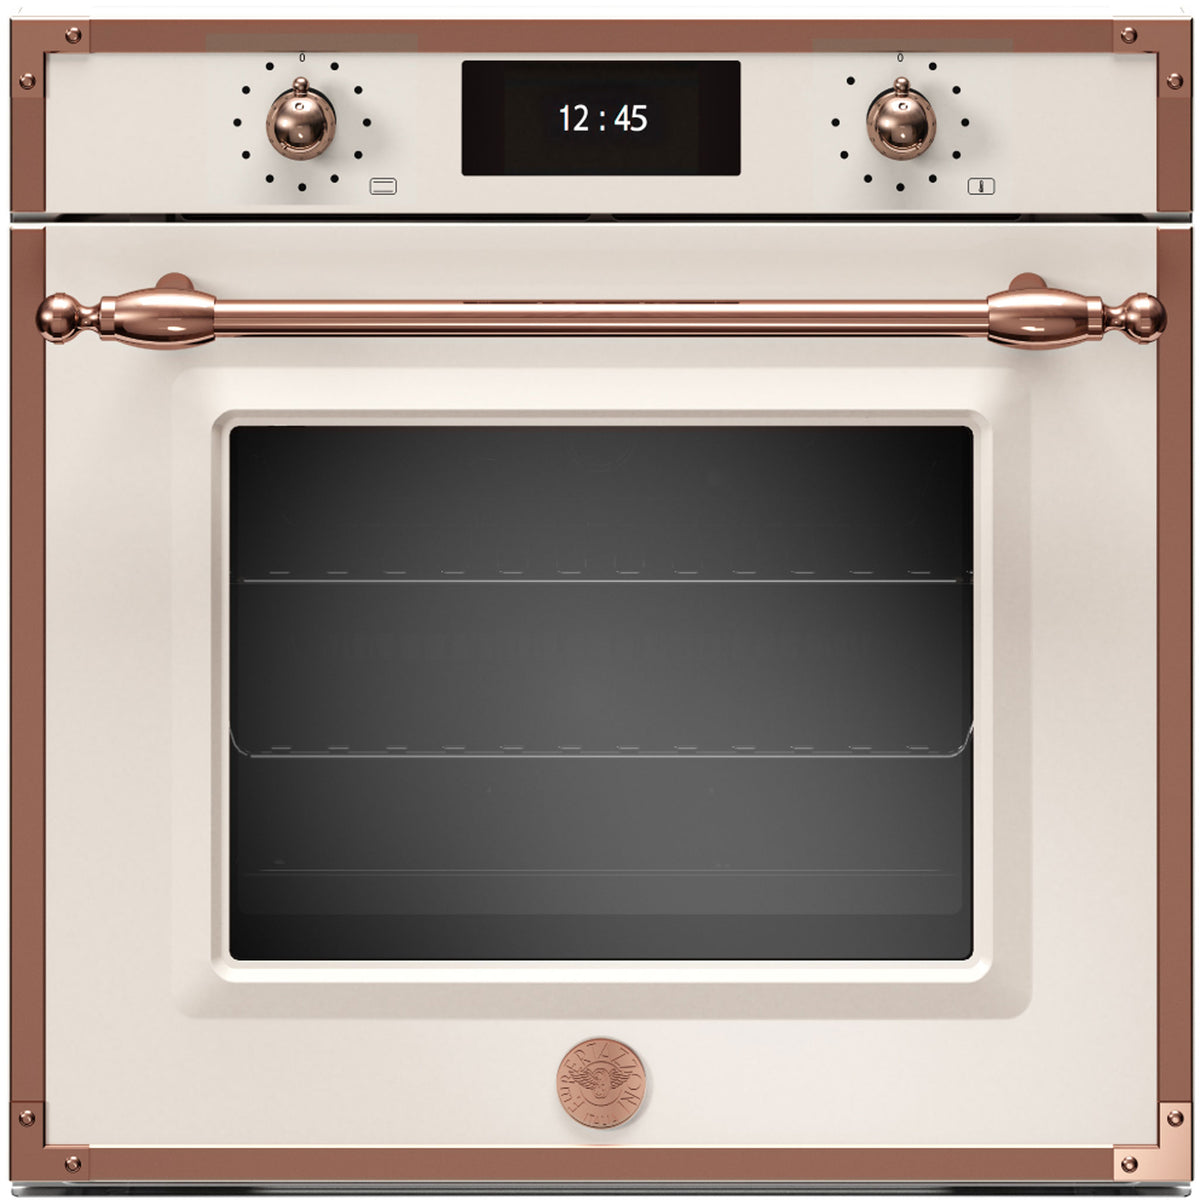 BERTAZZONI F6011HERVPTAC 60cm Electric Multifunction Oven with steam cooking and Pyrolytic cleaning in Copper